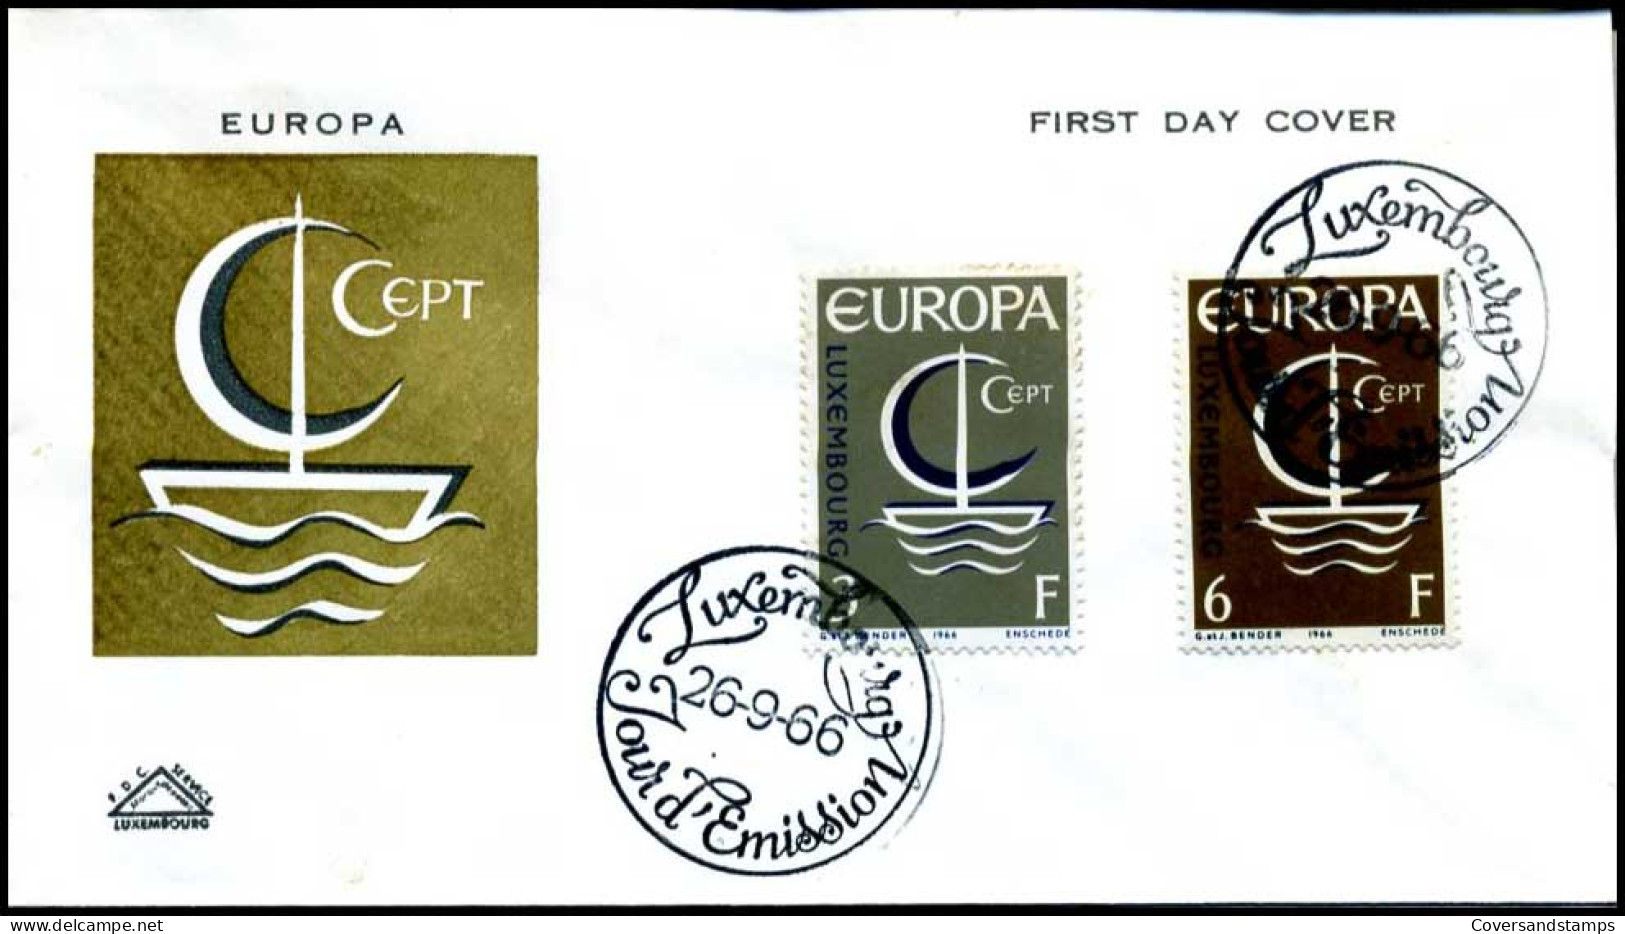  Luxembourg - FDC - Europa CEPT 1966 - 1966